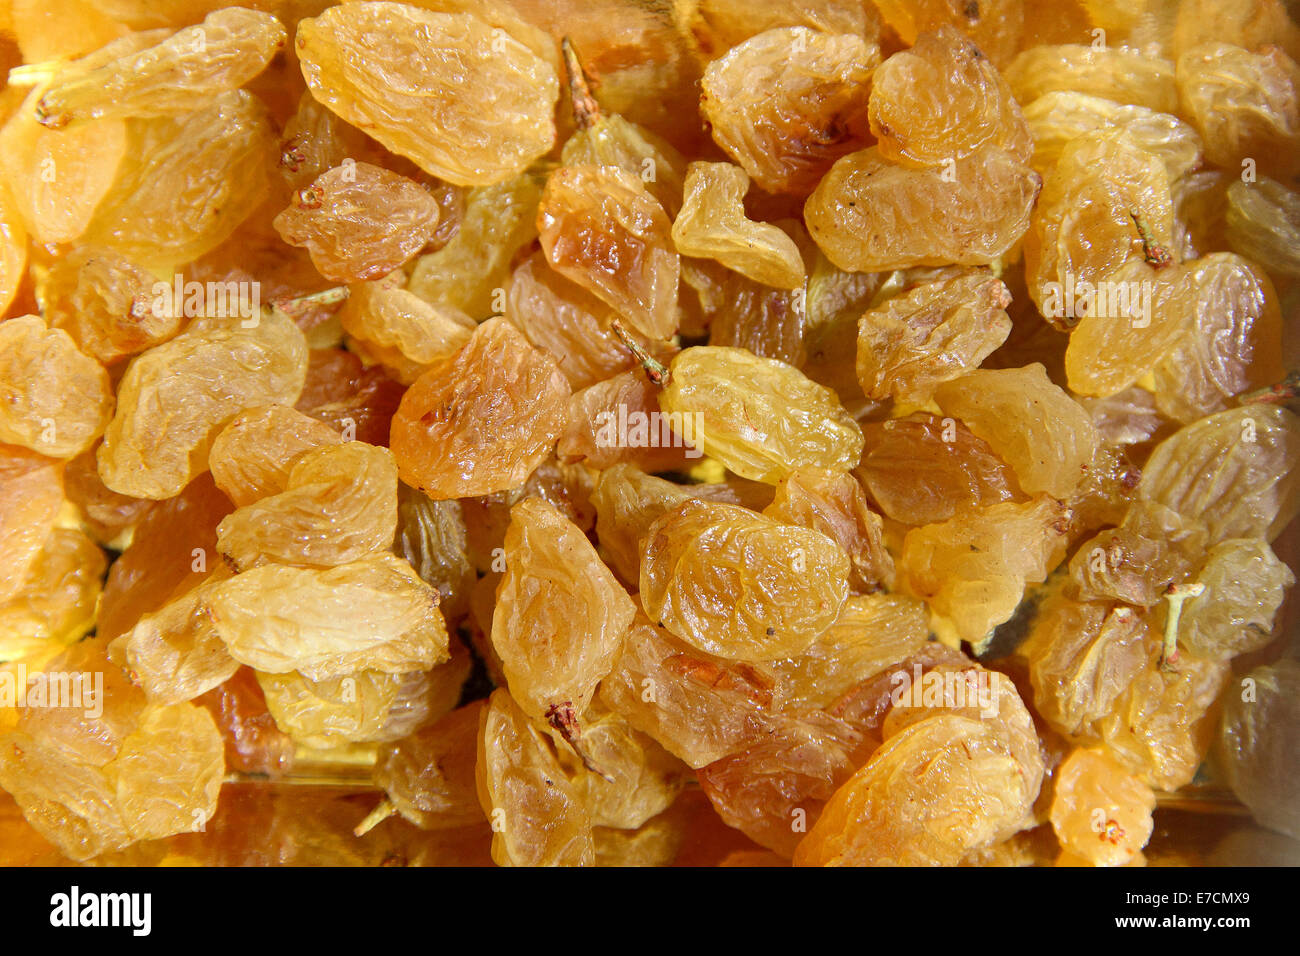 Raisins are yellowish brown, nutritious, sweet and sour dried grape fruits Stock Photo